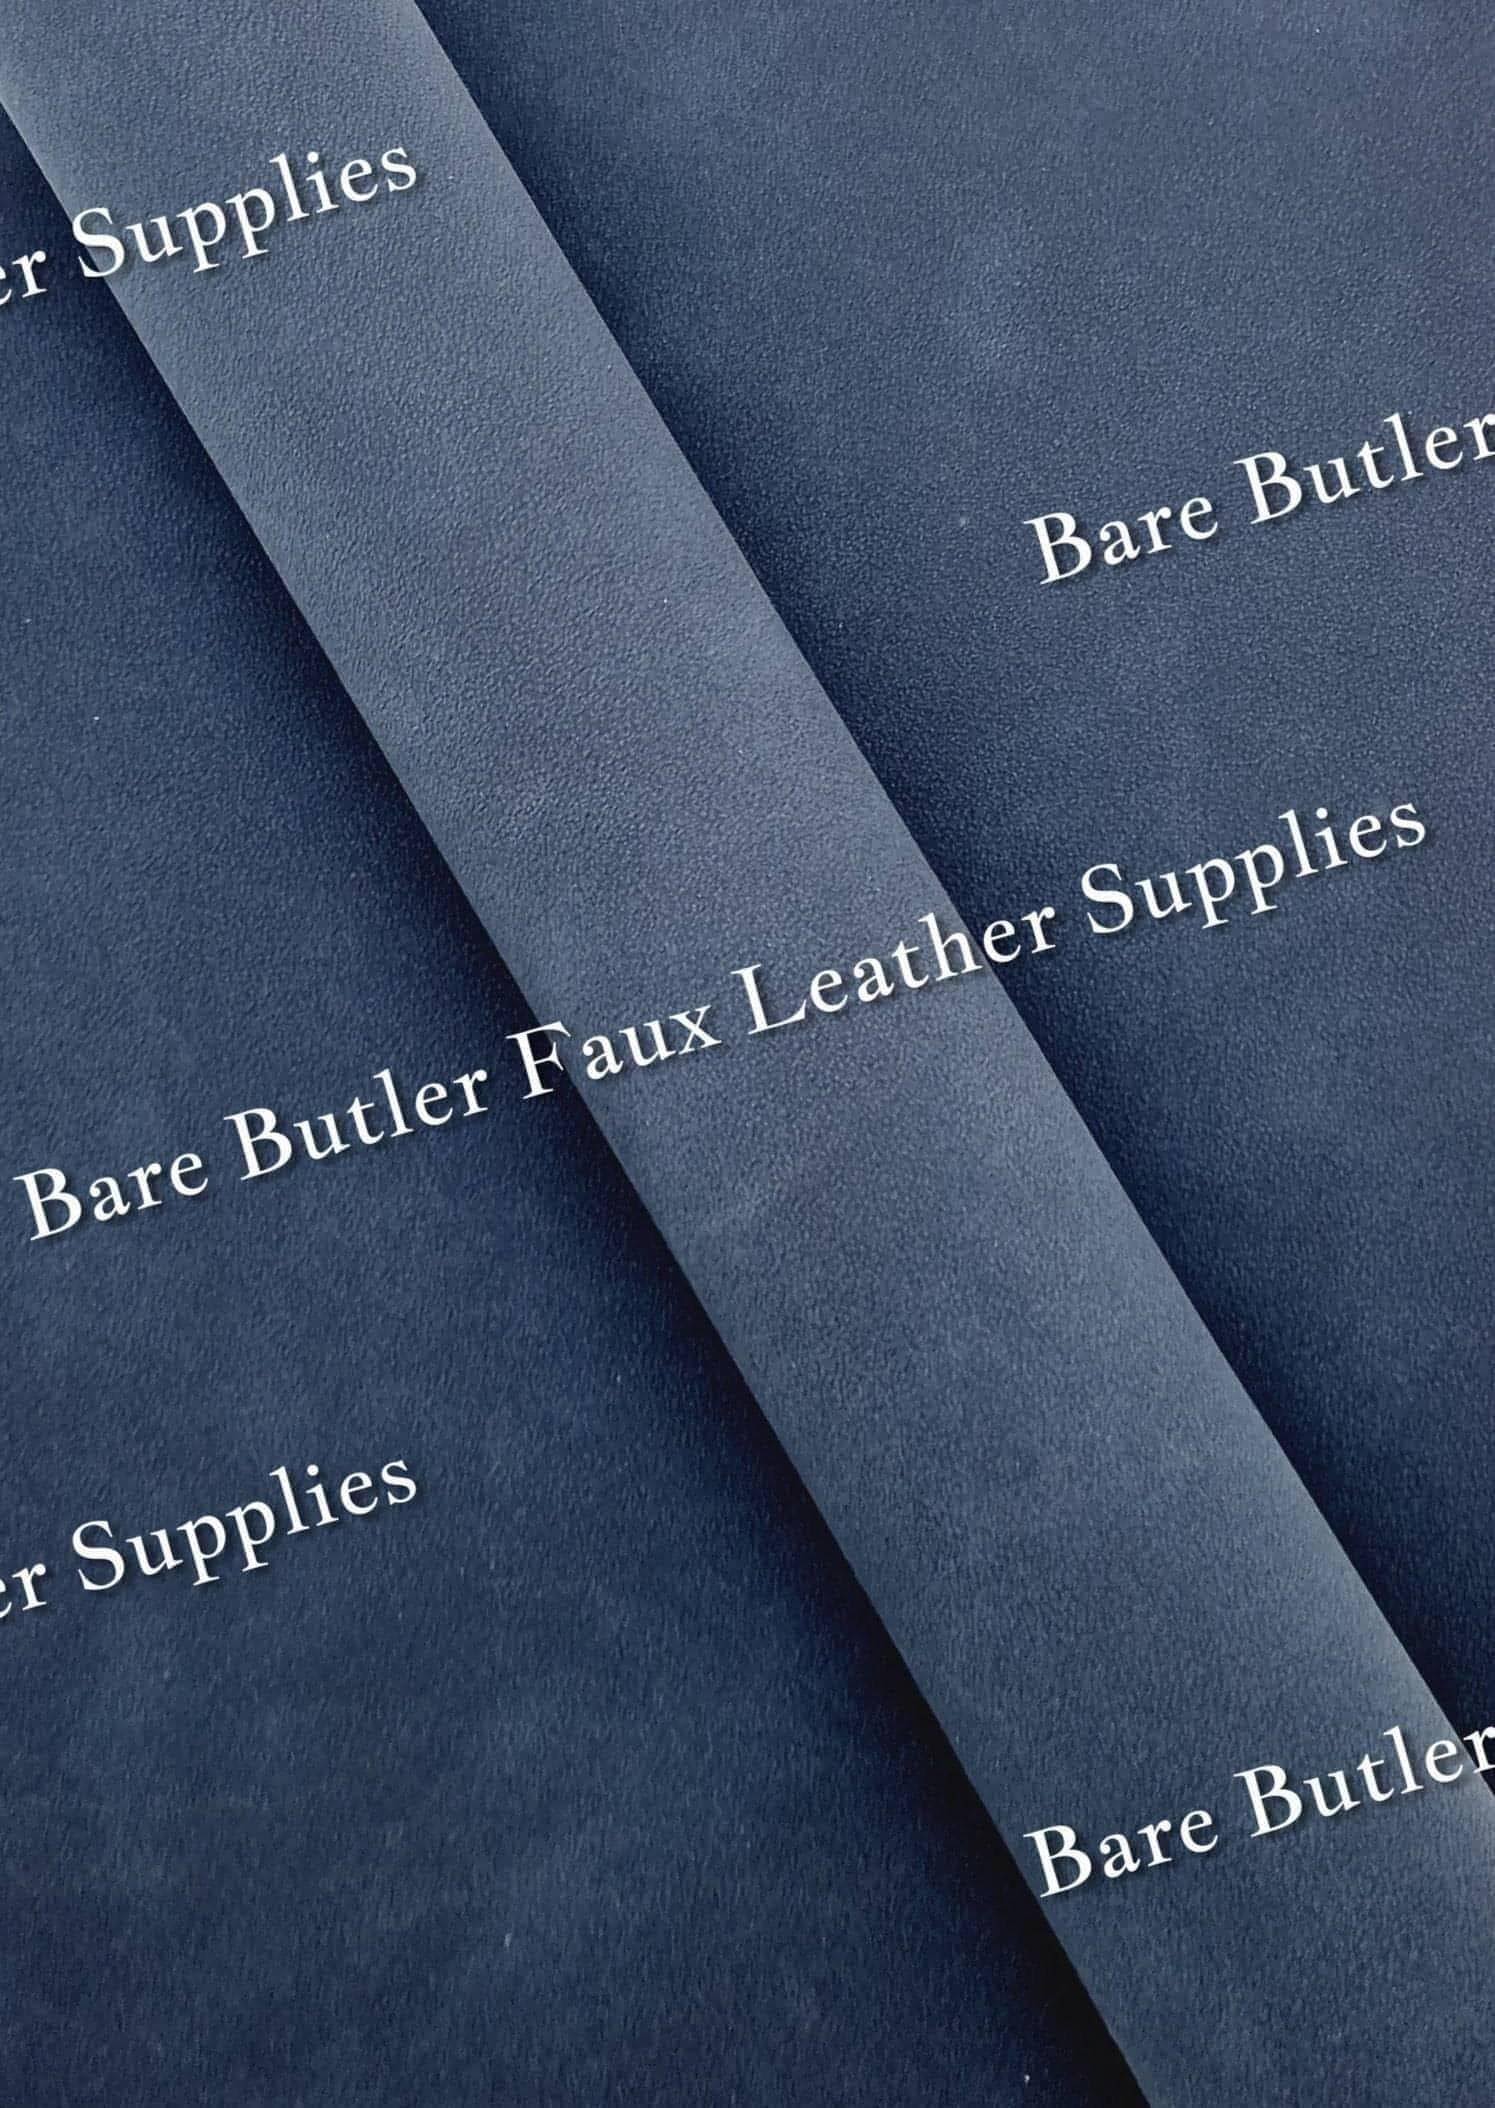 Suede - Dark Blue - Faux, Faux Leather, Suede - Bare Butler Faux Leather Supplies 